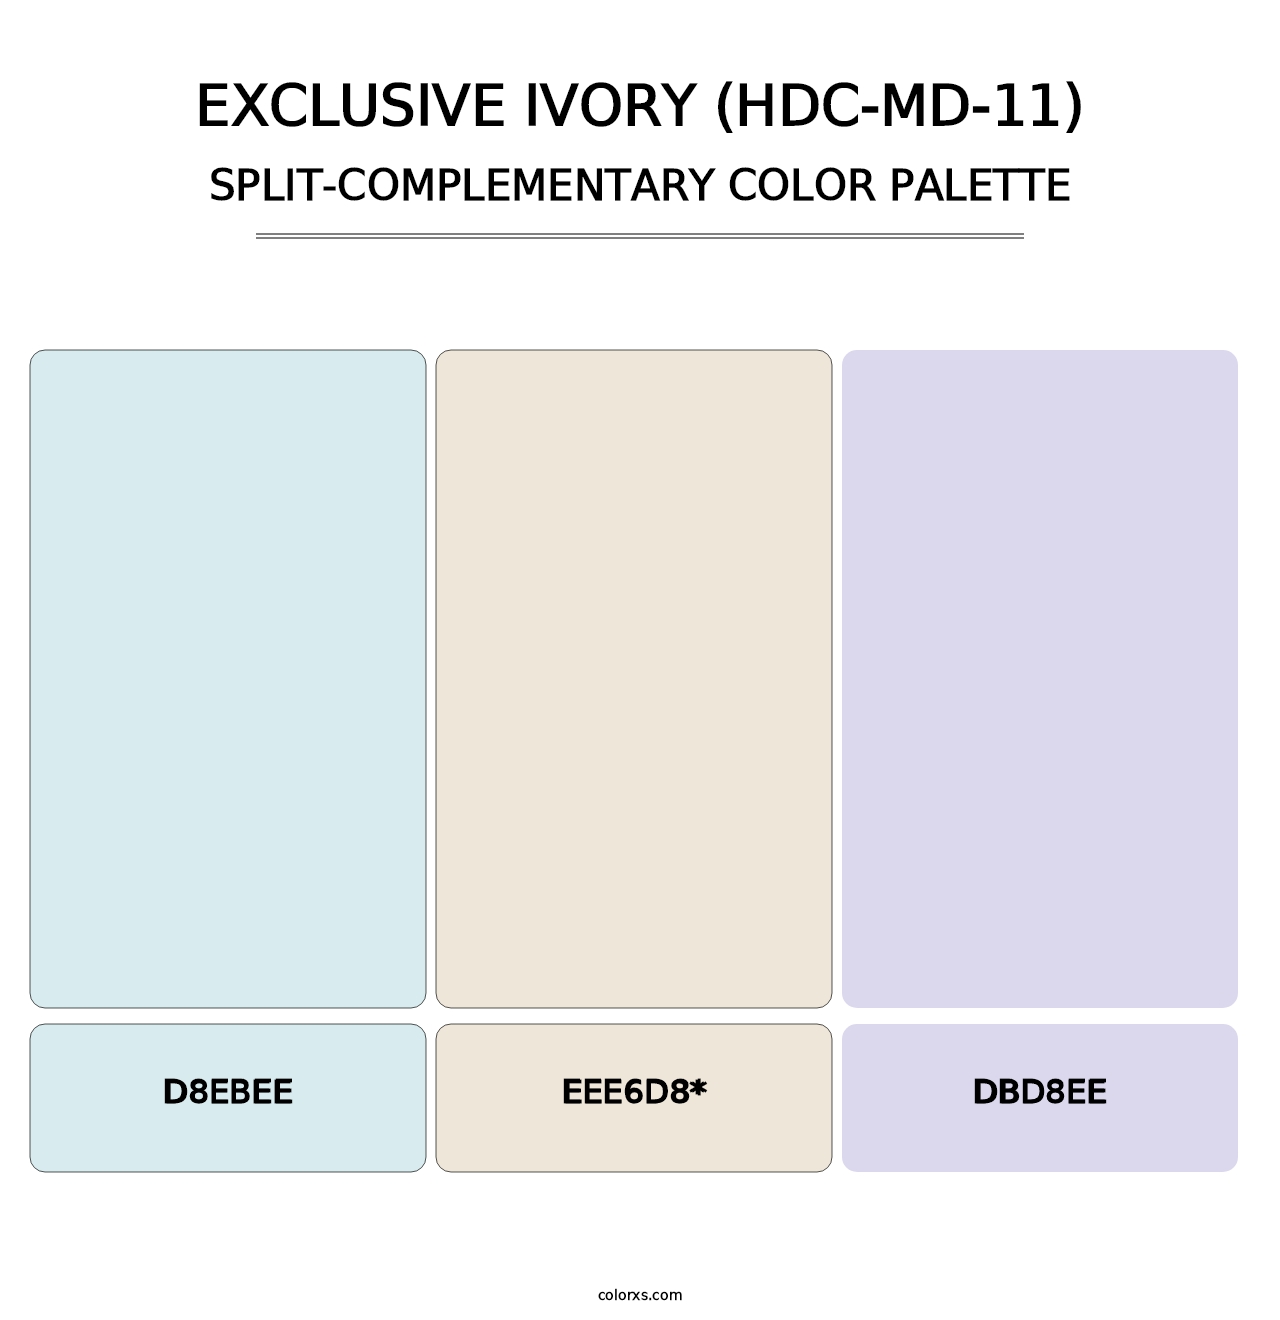 Exclusive Ivory (HDC-MD-11) - Split-Complementary Color Palette